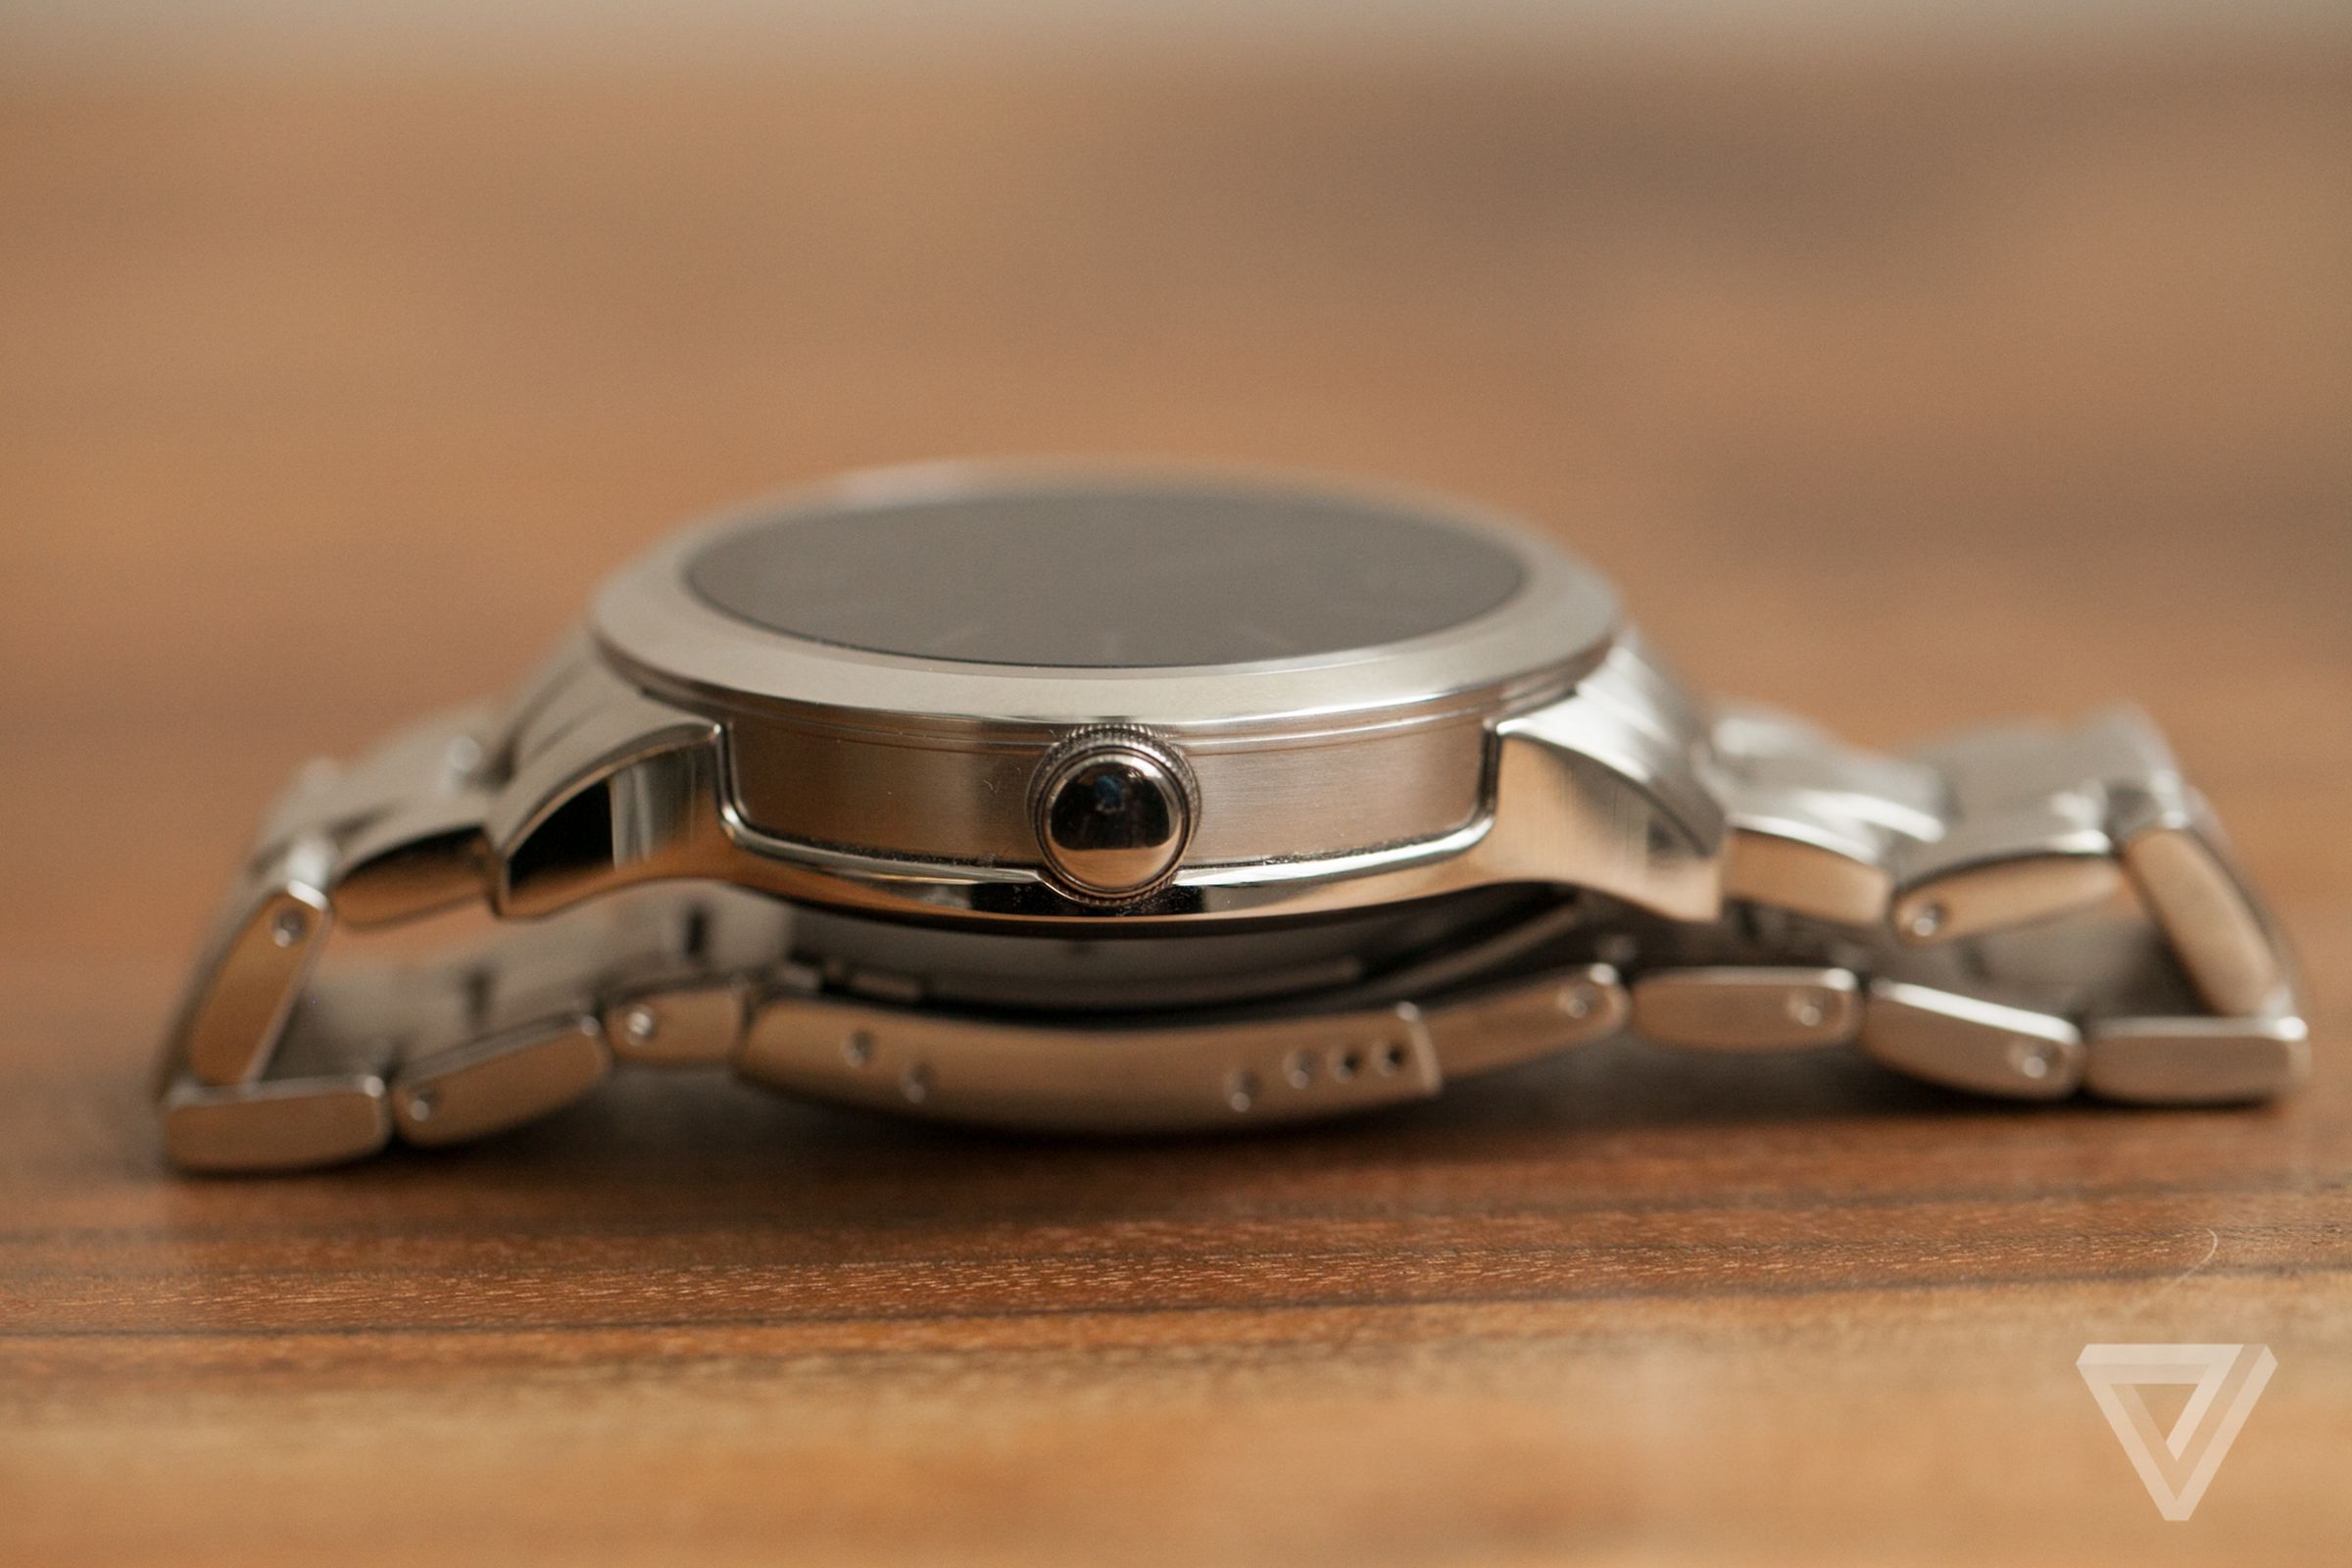 Fossil Q Founder smartwatch